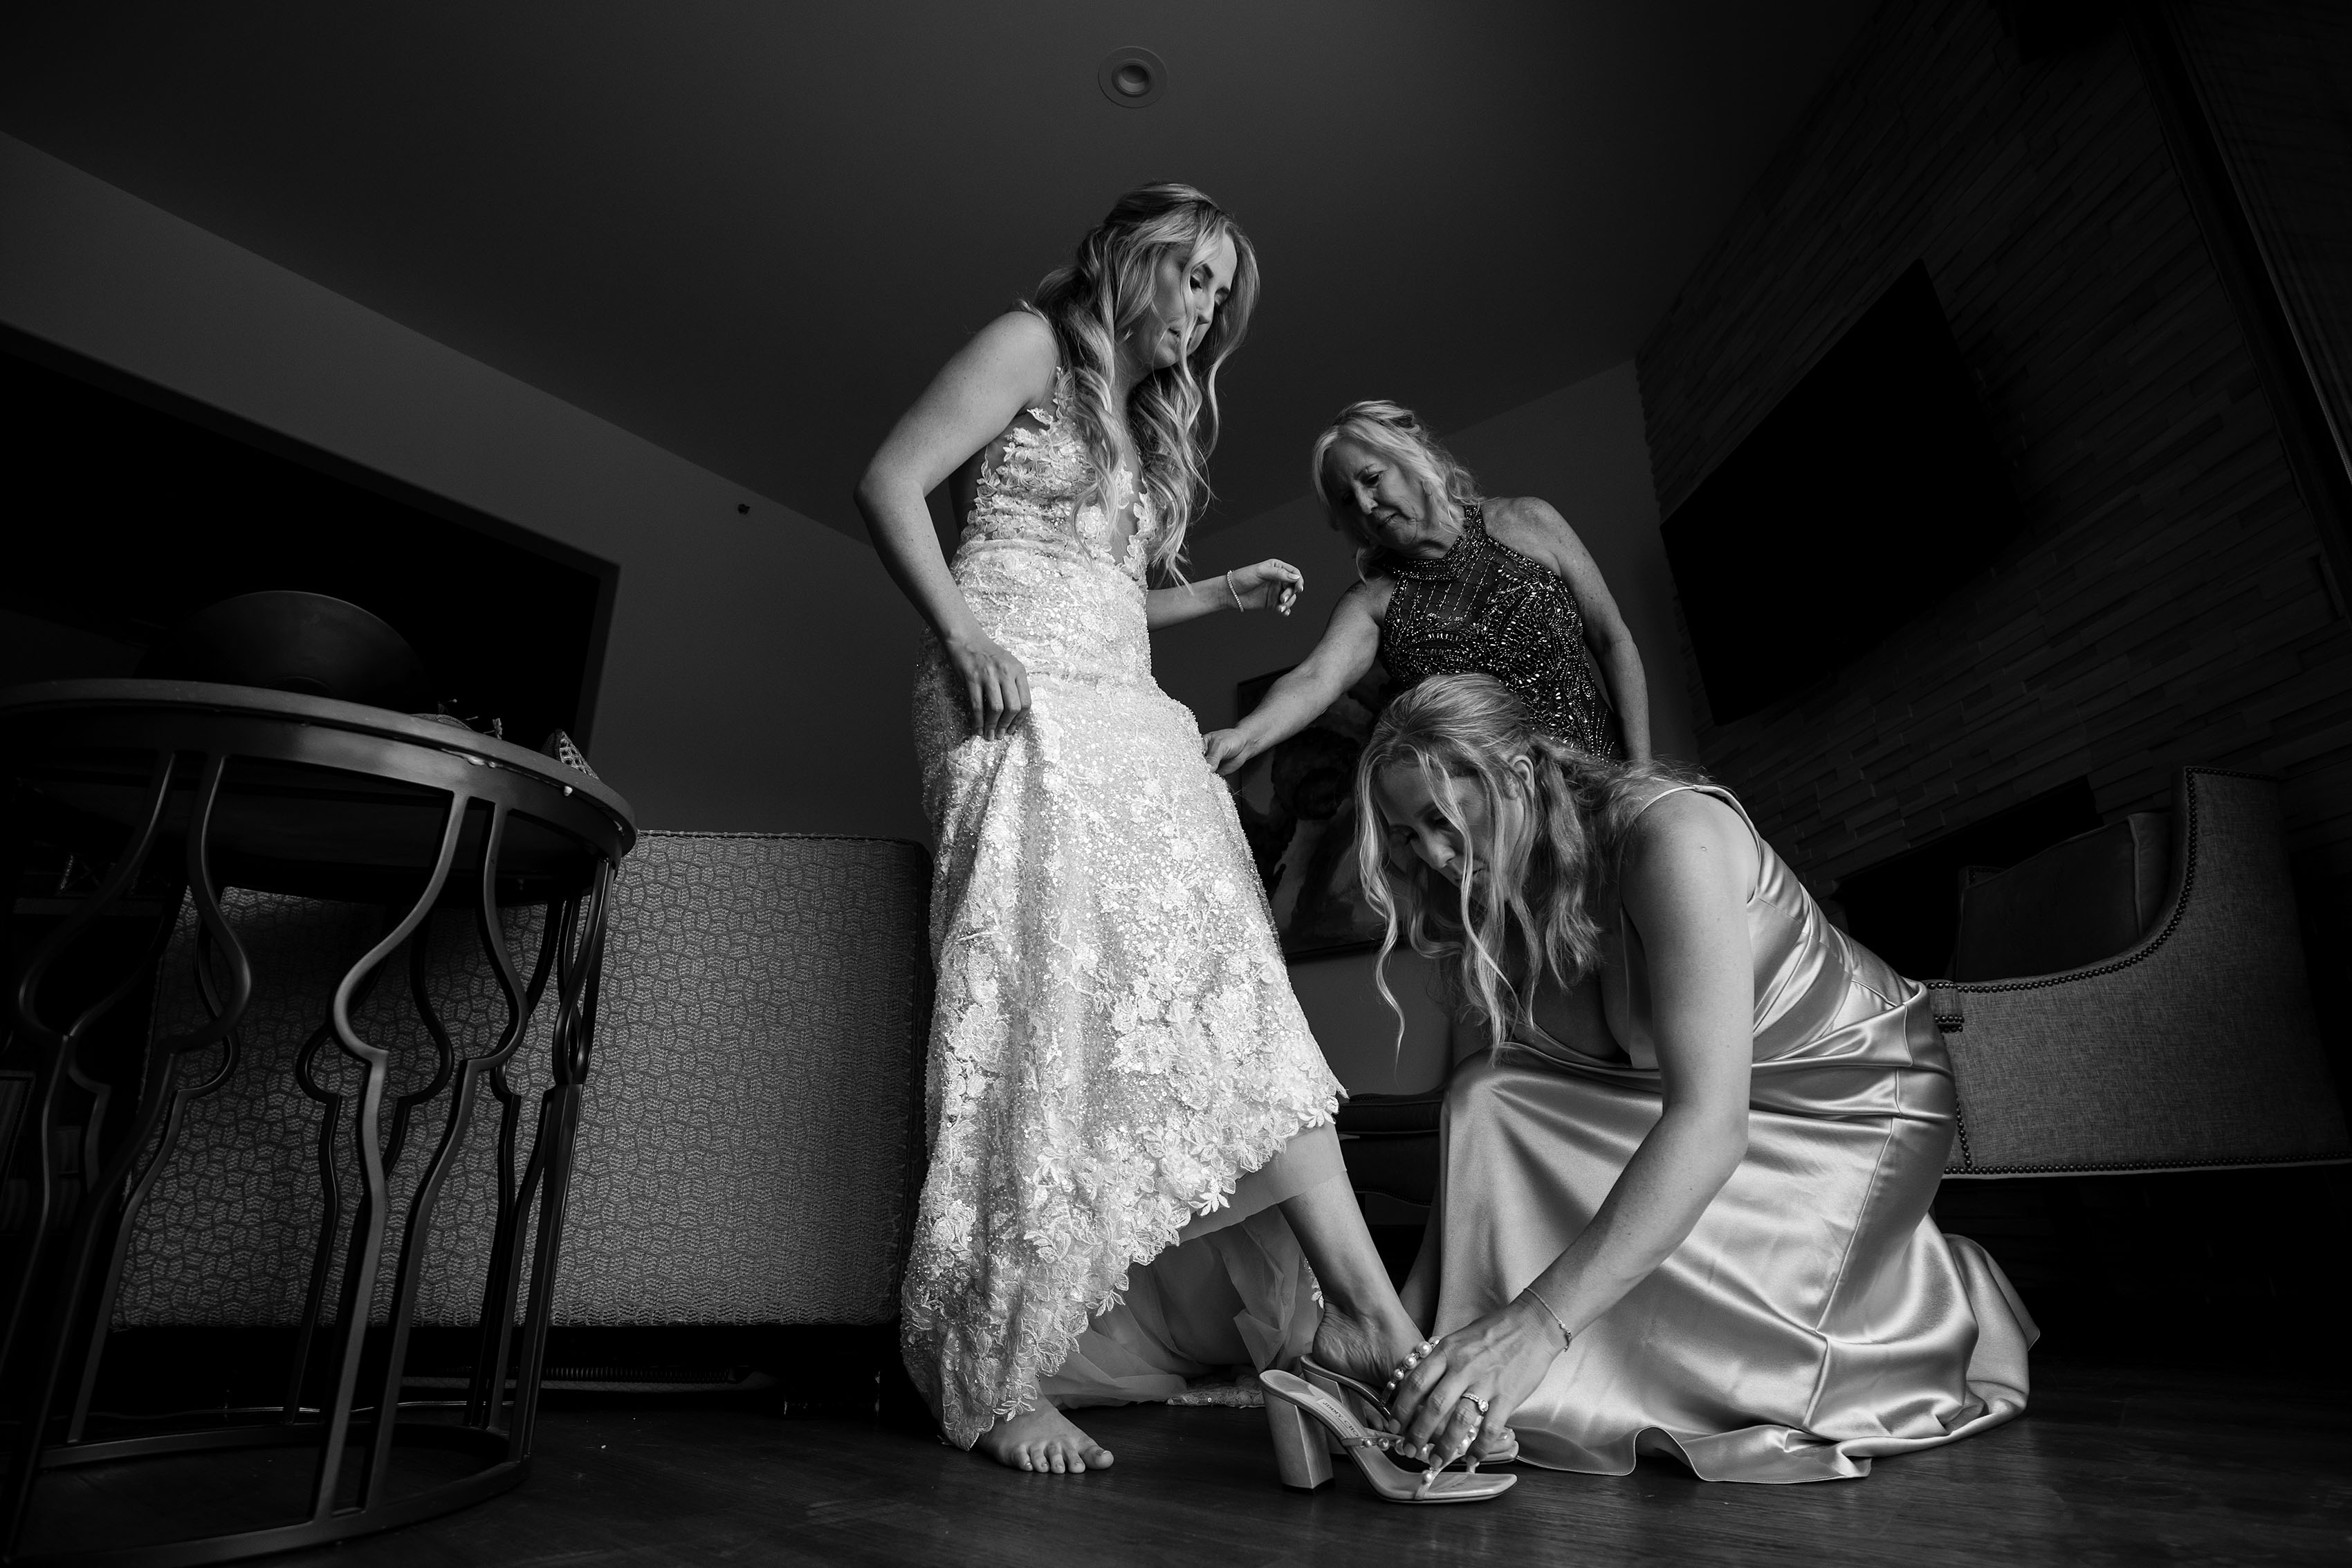 The bride puts on her shoes and dress